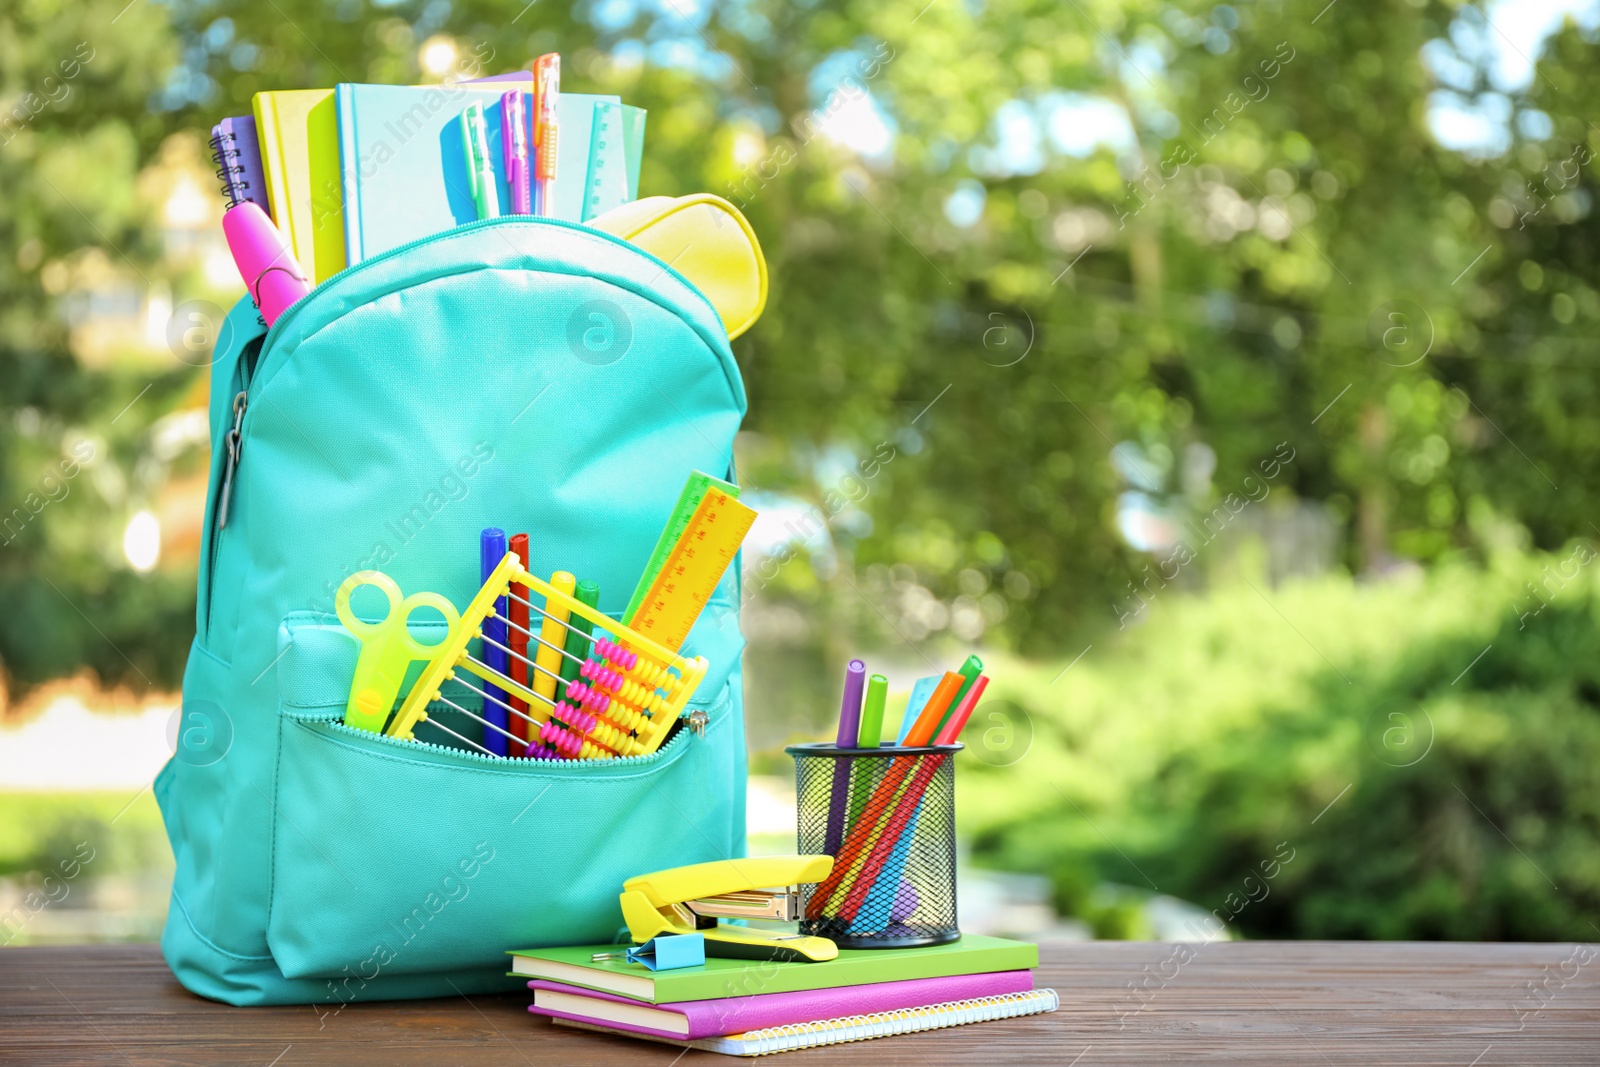 Photo of Bright backpack and school stationery on table outdoors, space for text